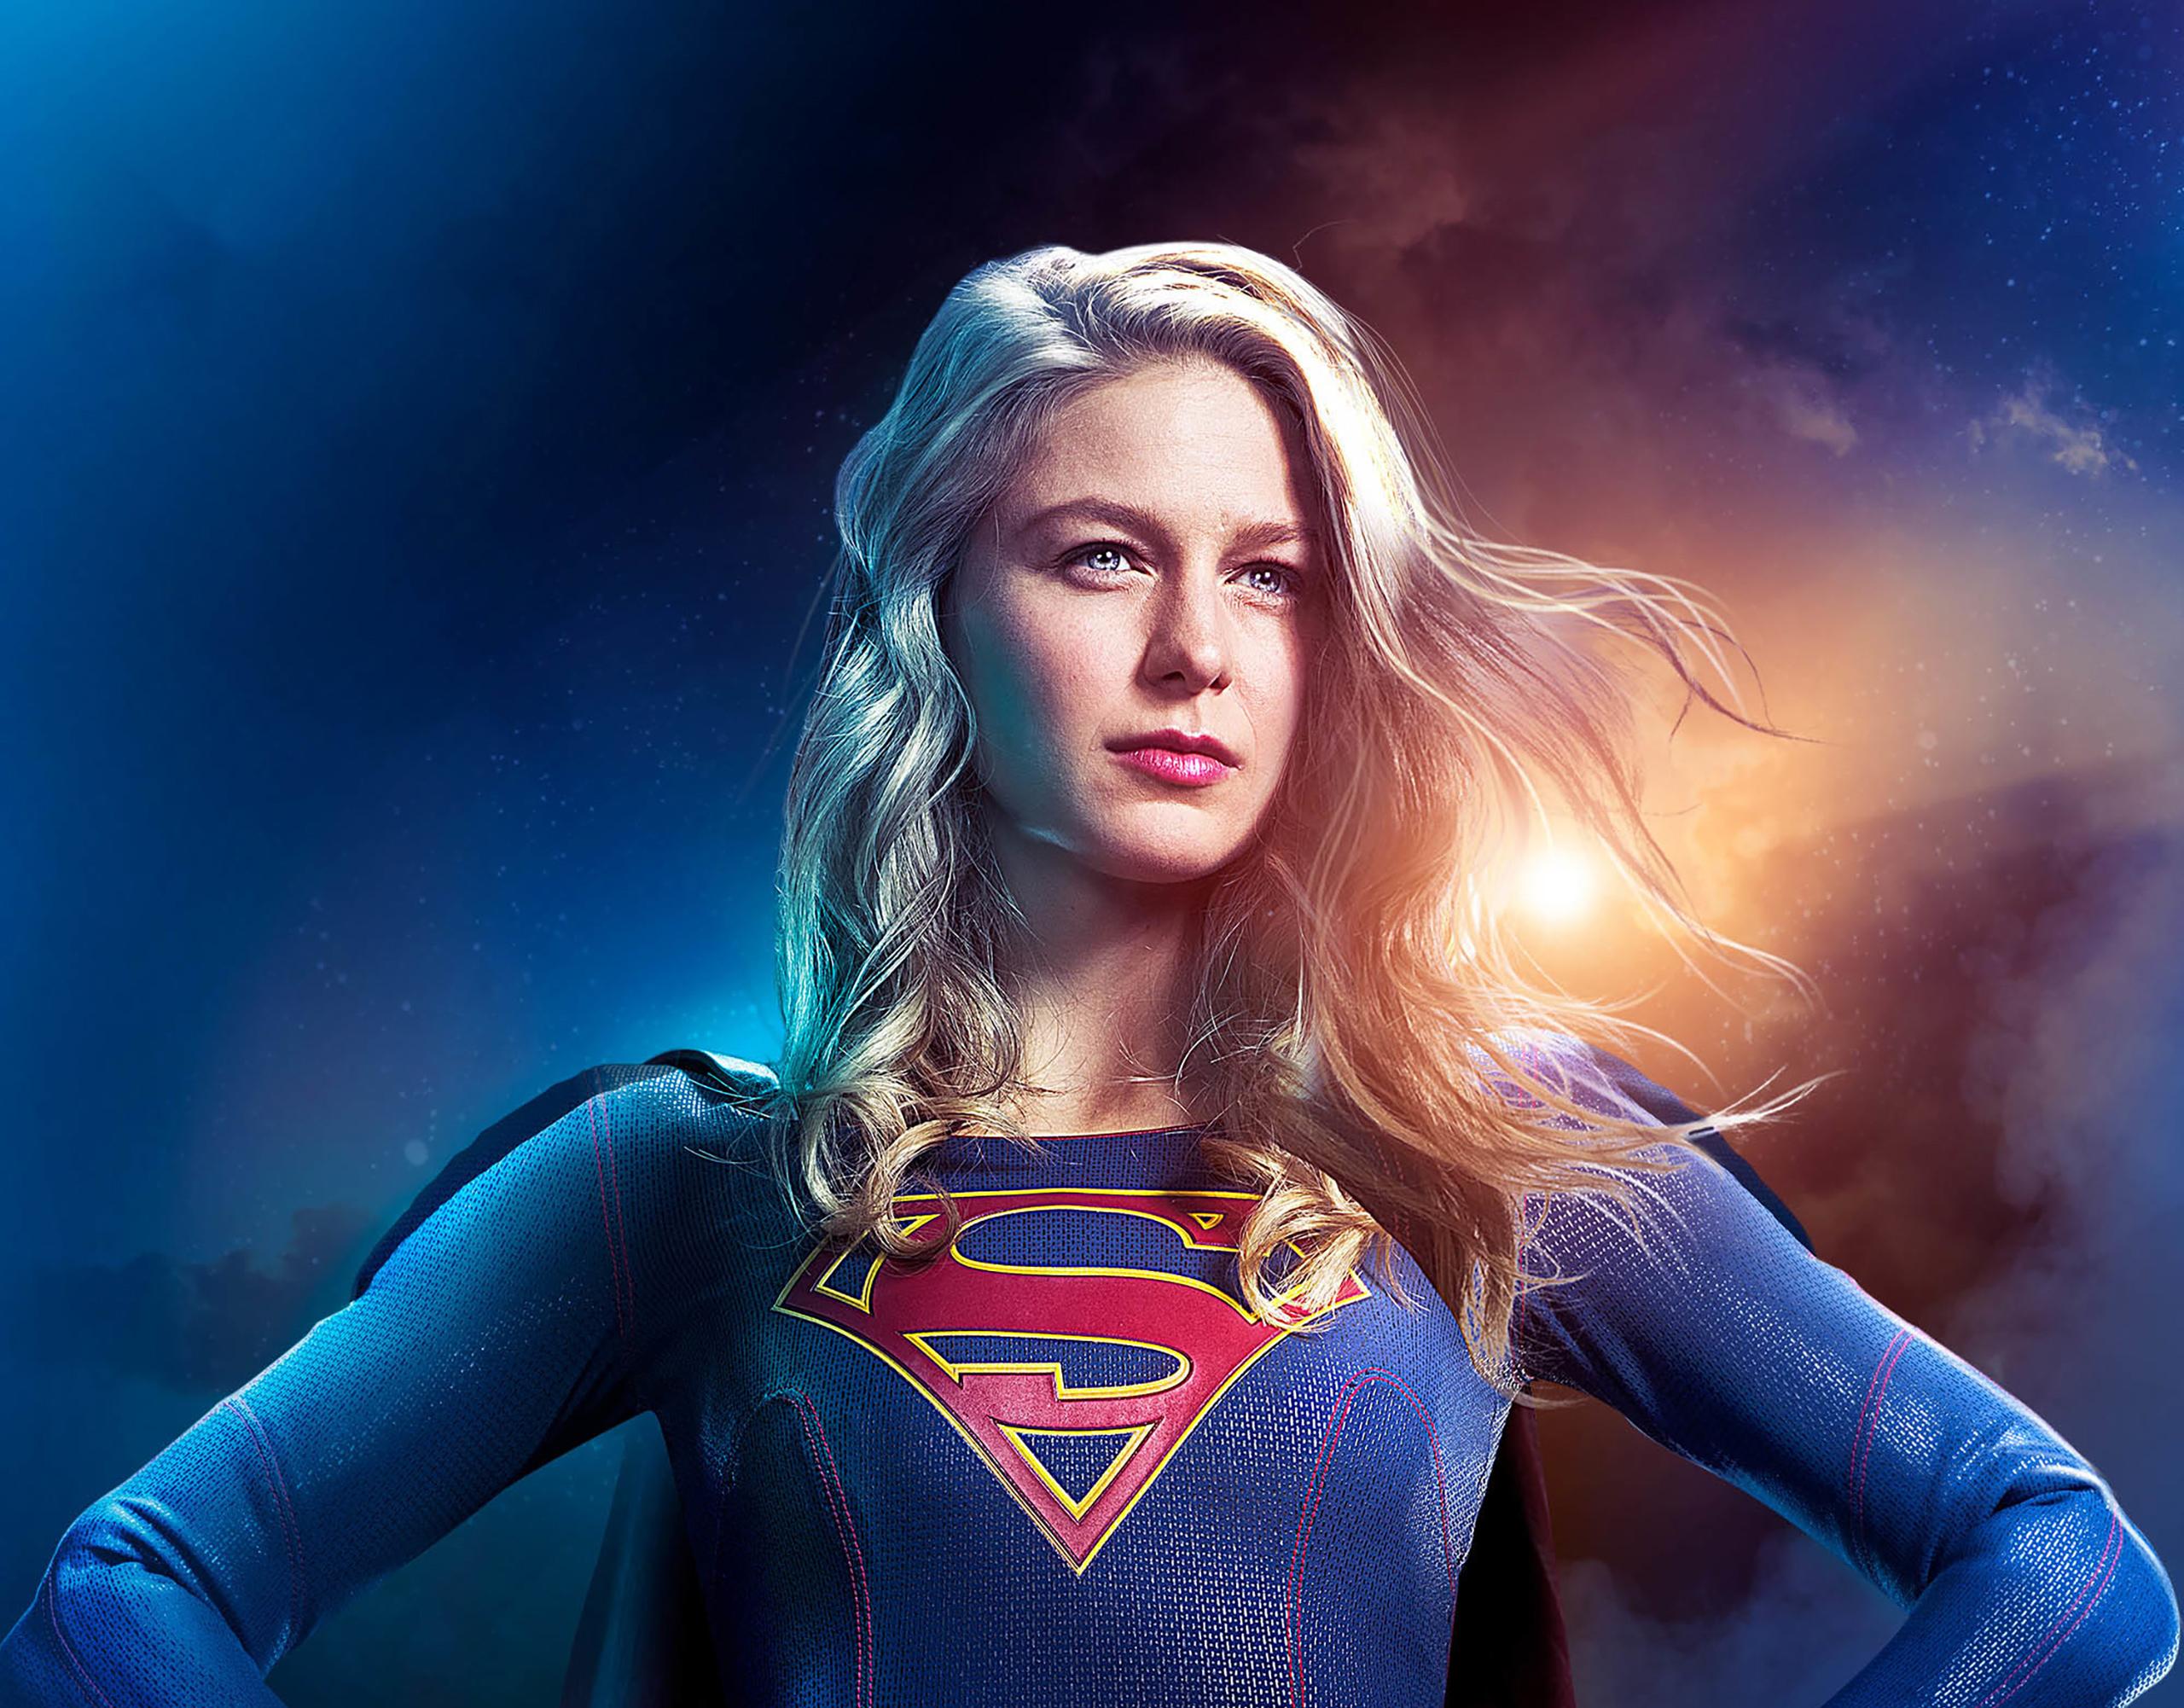 2560 x 2002 · jpeg - Supergirl 2019 Poster, HD Tv Shows, 4k Wallpapers, Images, Backgrounds ...